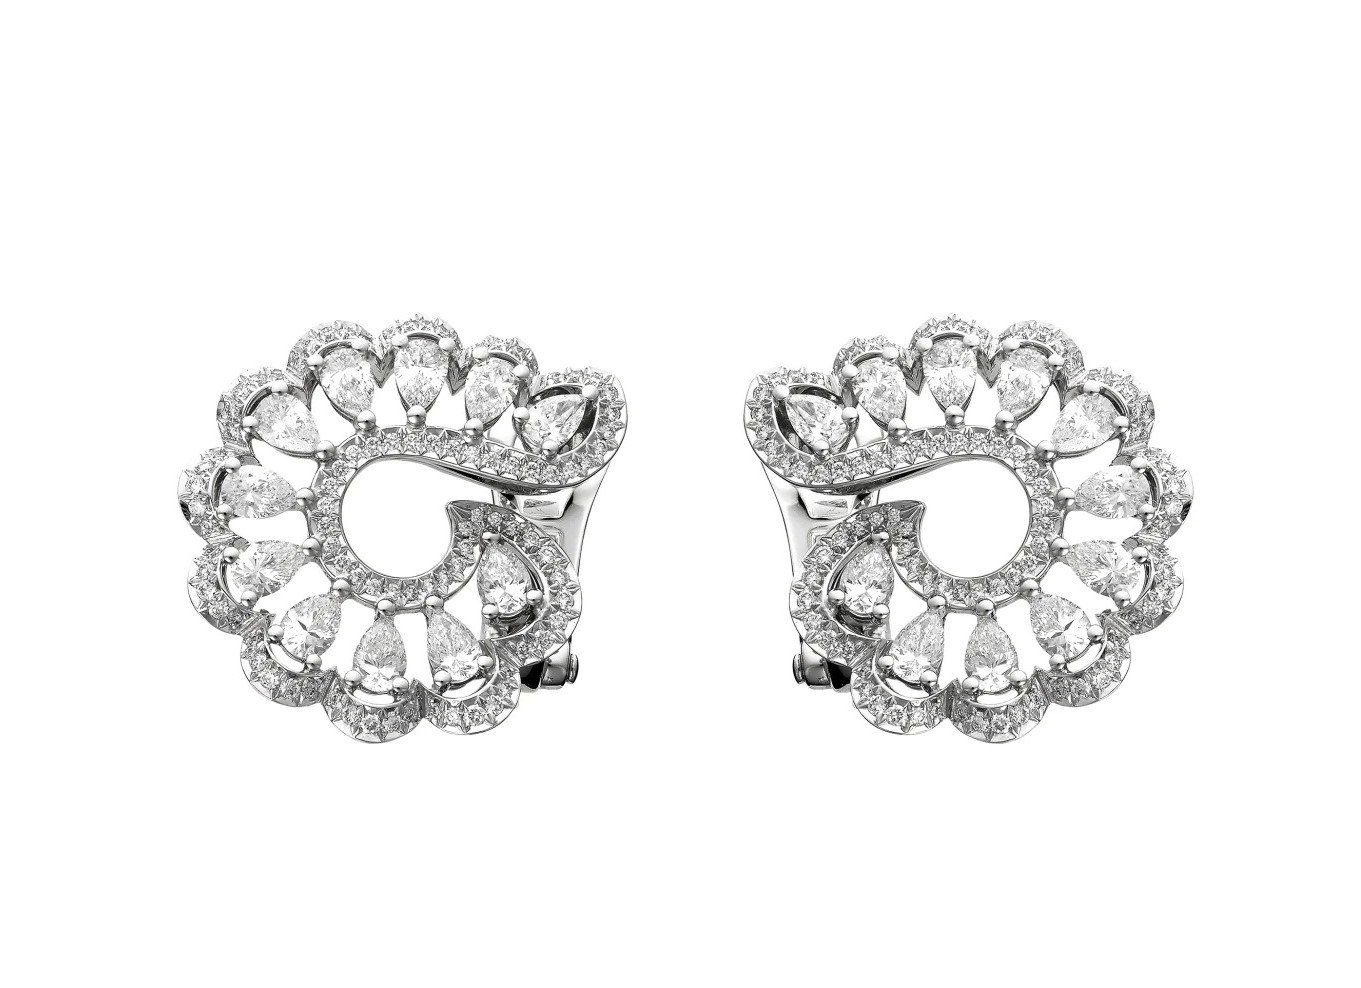 Chopard Precious Lace Vague Earrings in Ethical White Gold and Diamonds.jpg